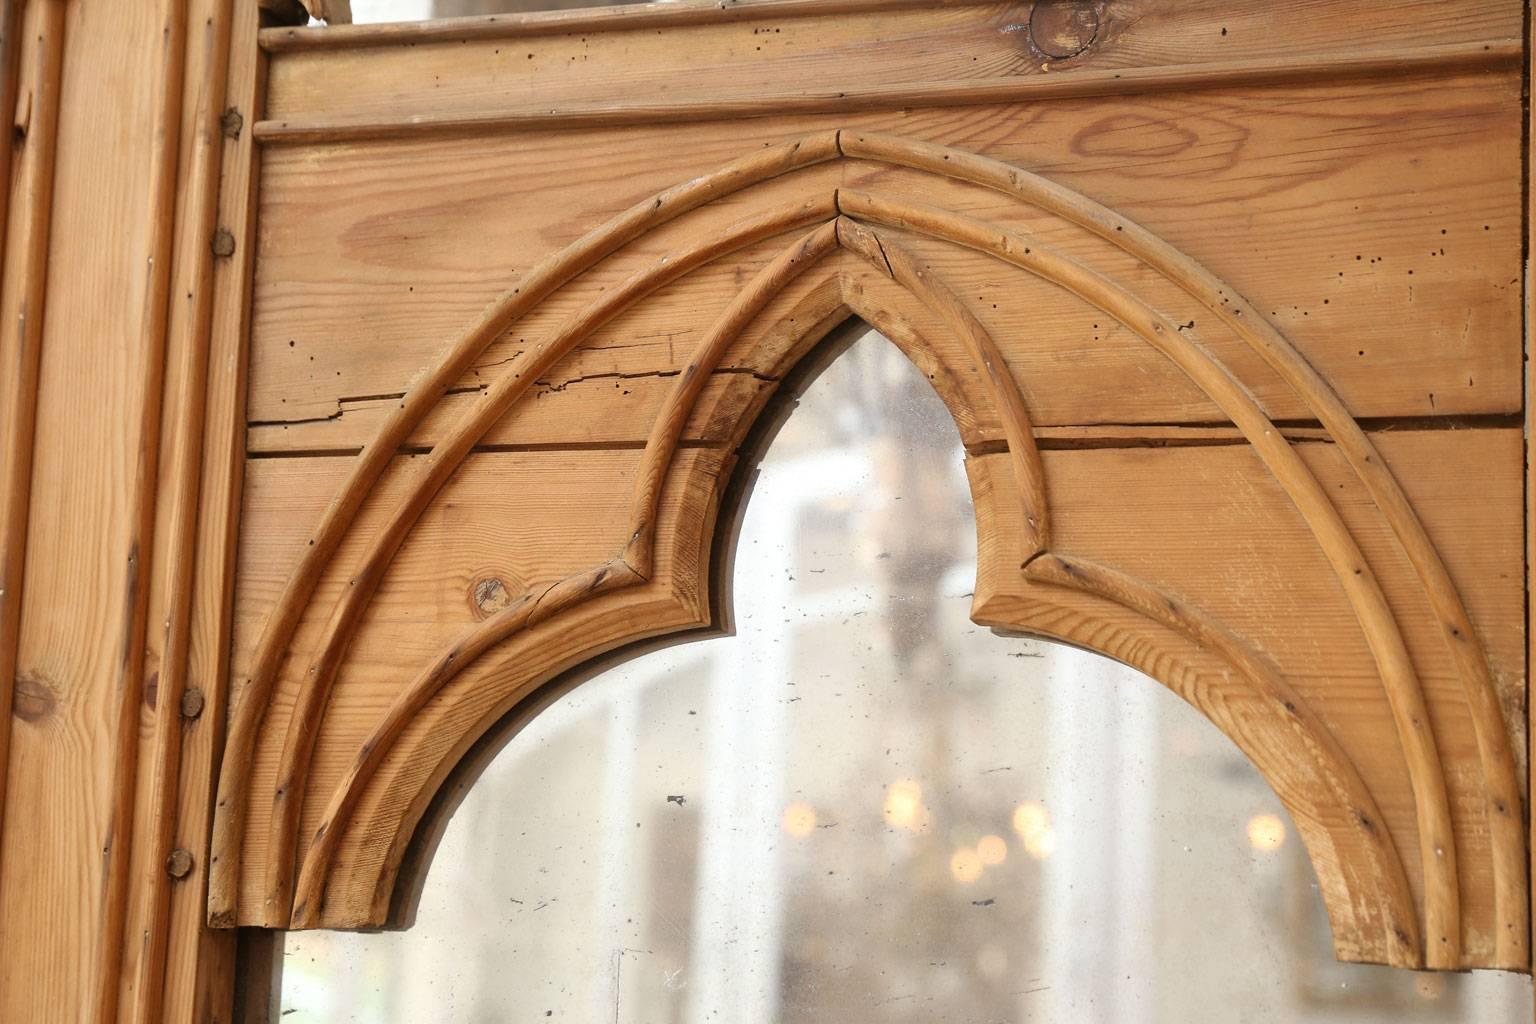 Pair of neo-gothic stripped pine mirrors dating to the late 19th century, (circa 1850-1870). French in origin. Each frame contains its original mercury-backed silvered two-panel mirror. Attractive 'diamond dust' covers both mirrors' edges. Sold